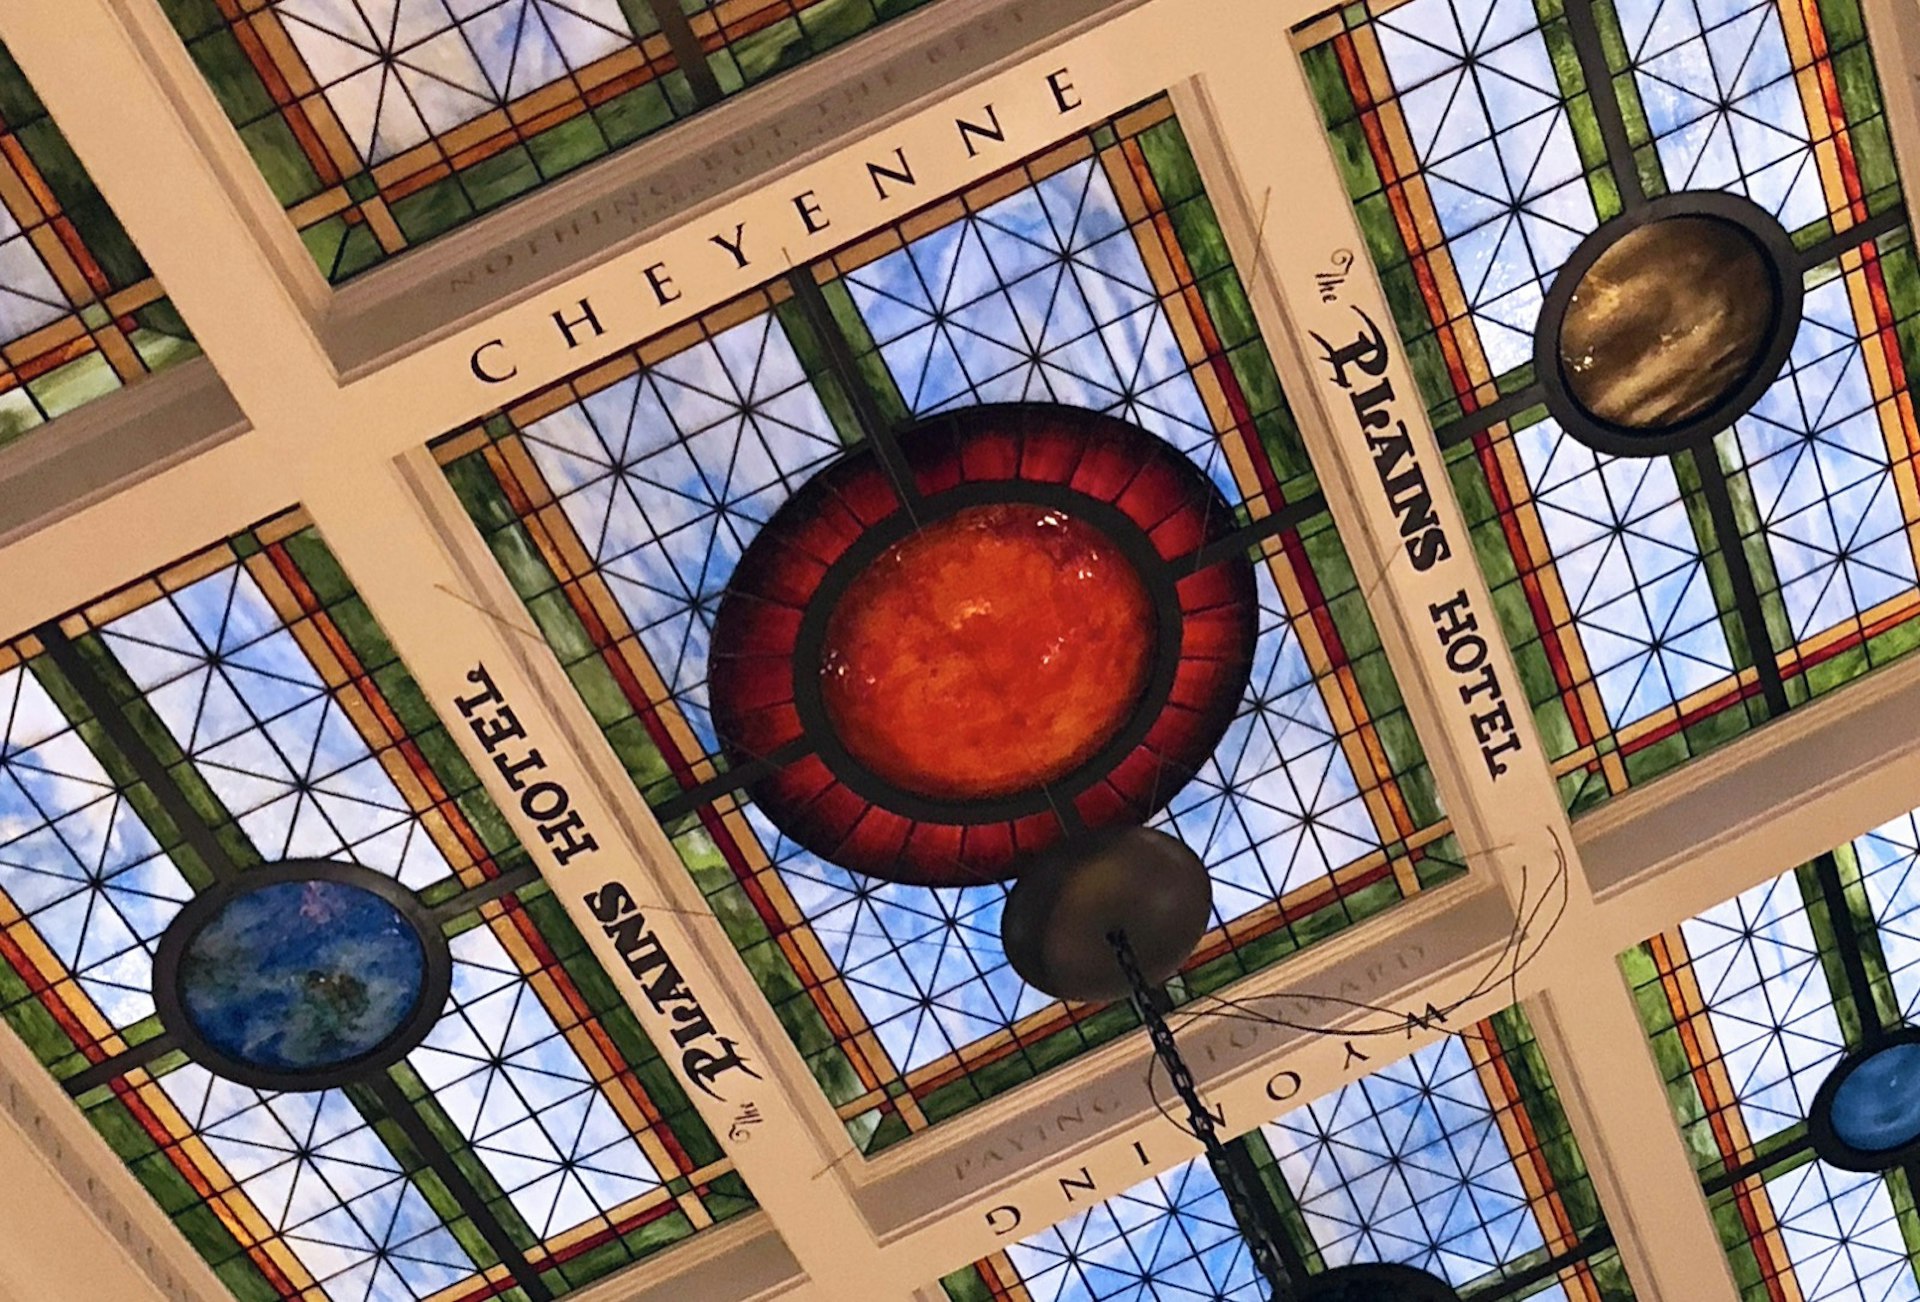 The words 'Cheyenne', 'Wyoming' and 'The Plains Hotel' surround a rectangular stained glass ceiling, with blue and red panes of glass and a circle motif © Dave Parfitt / Lonely Planet